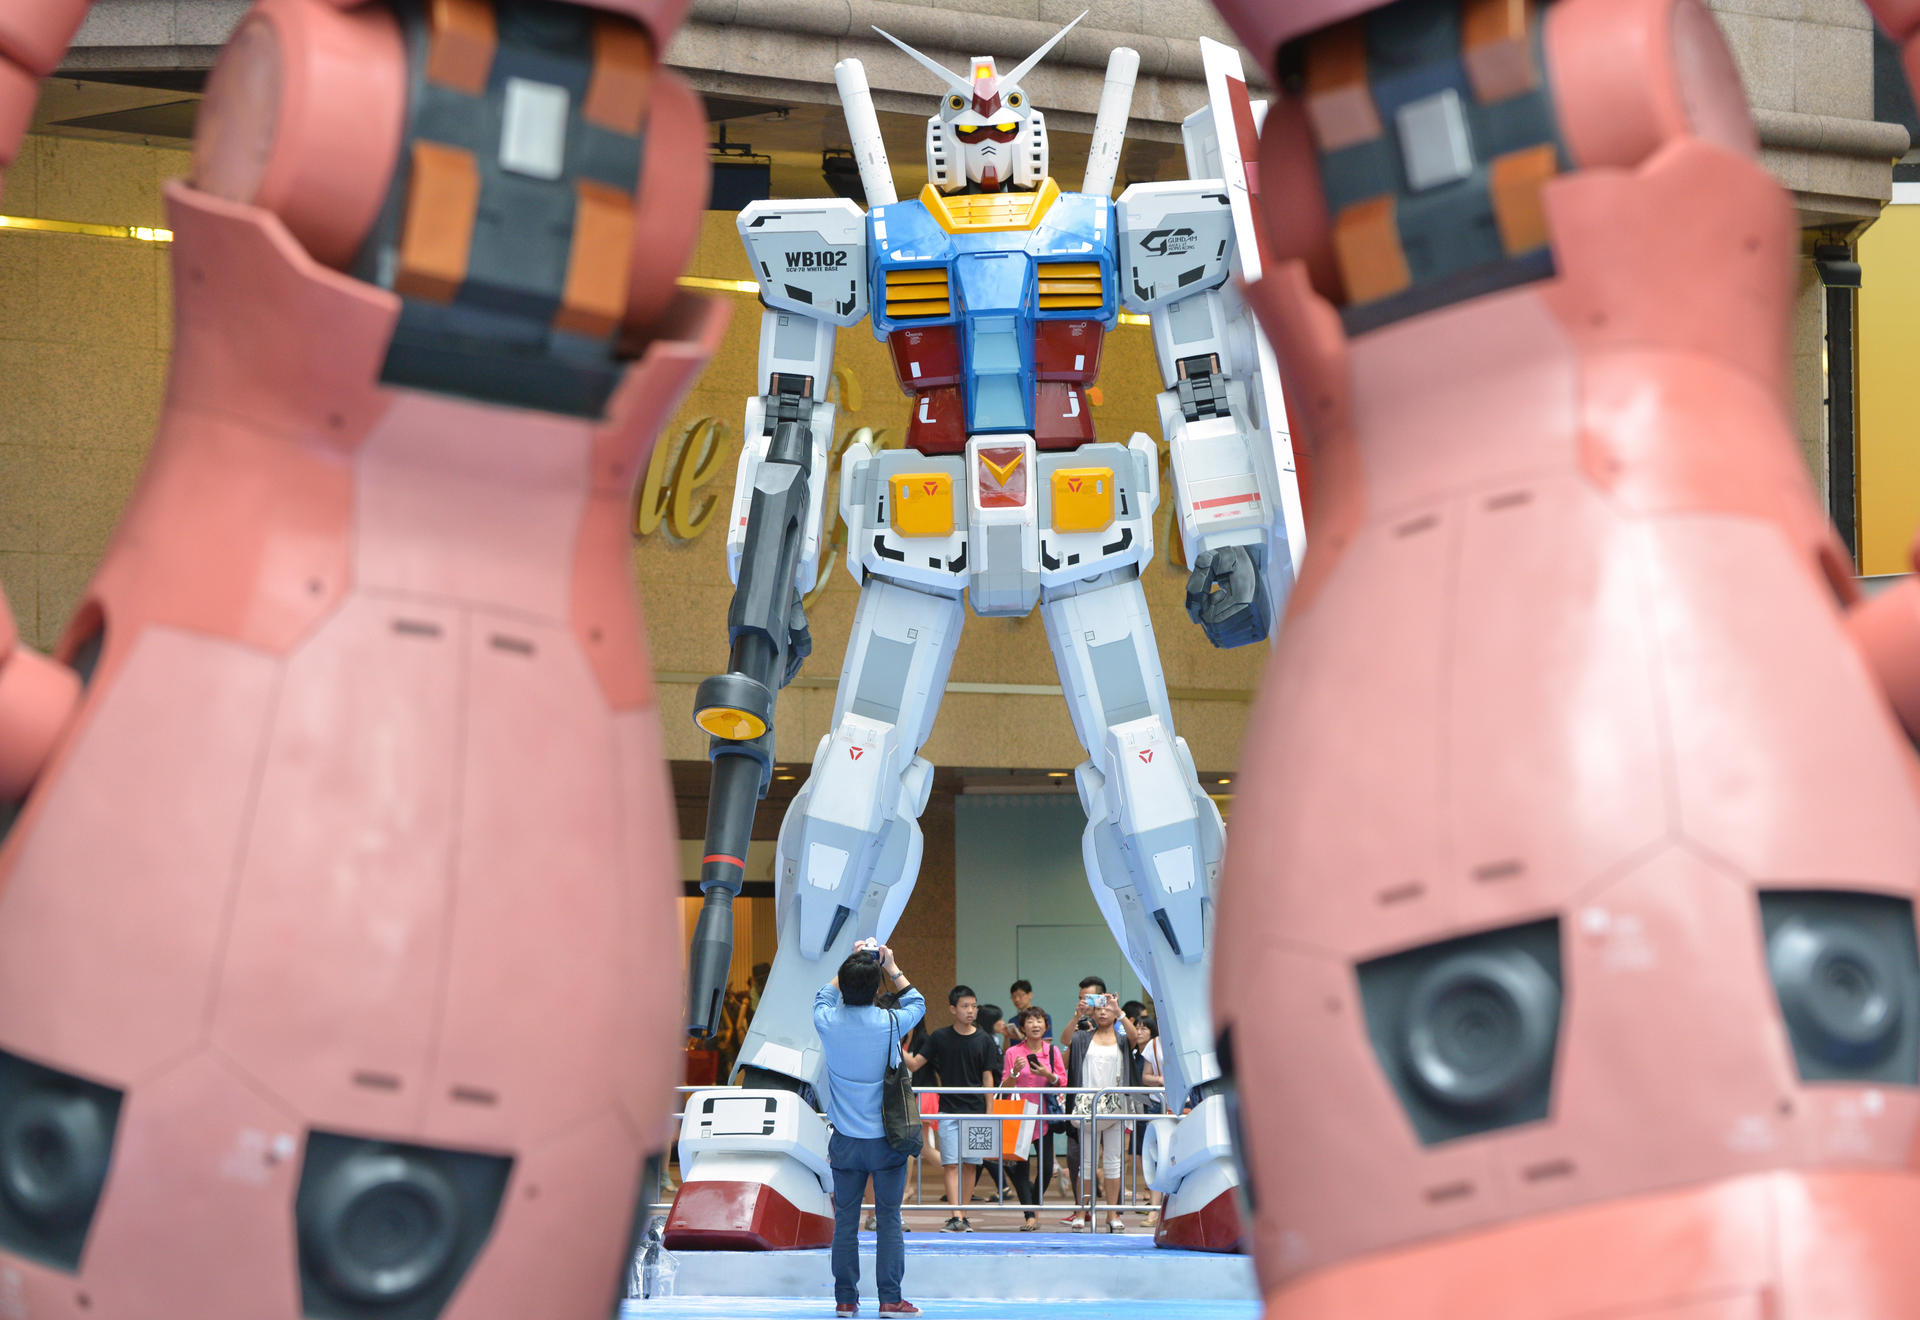 Mock-ups of giant anime robots at Times Square tower over visitors in a display that will last for more than two months. Photo: Thomas Yau